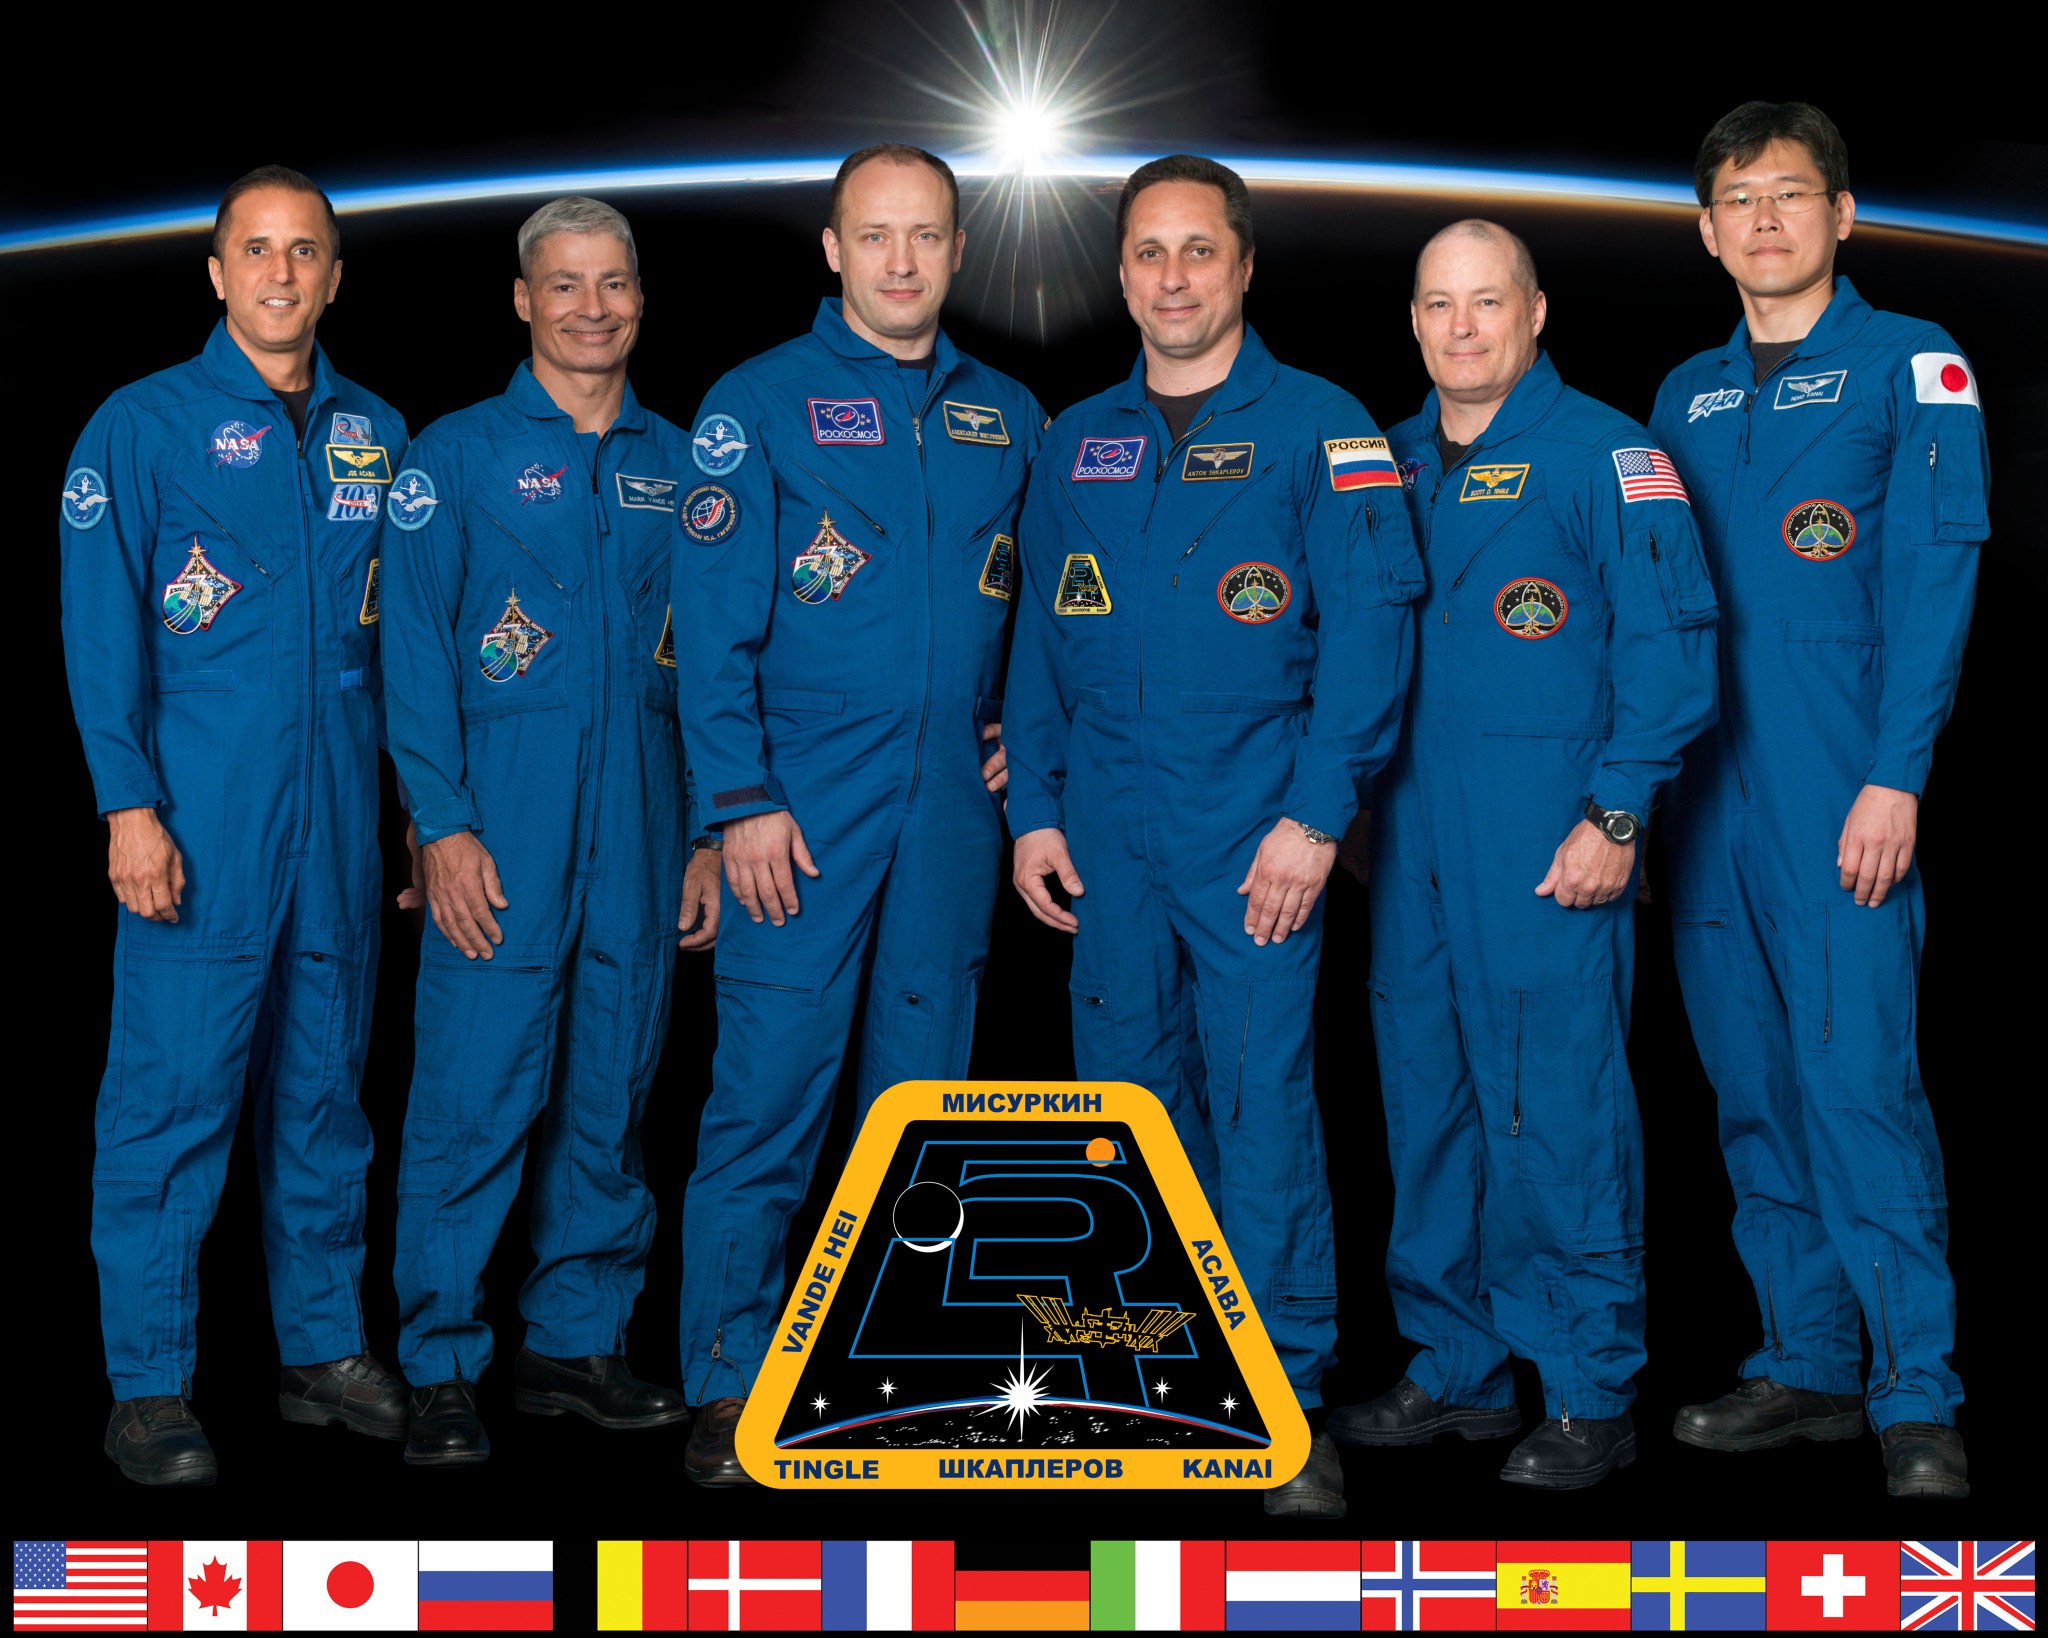 Six crew members of Expedition 54 pose with their mission patch